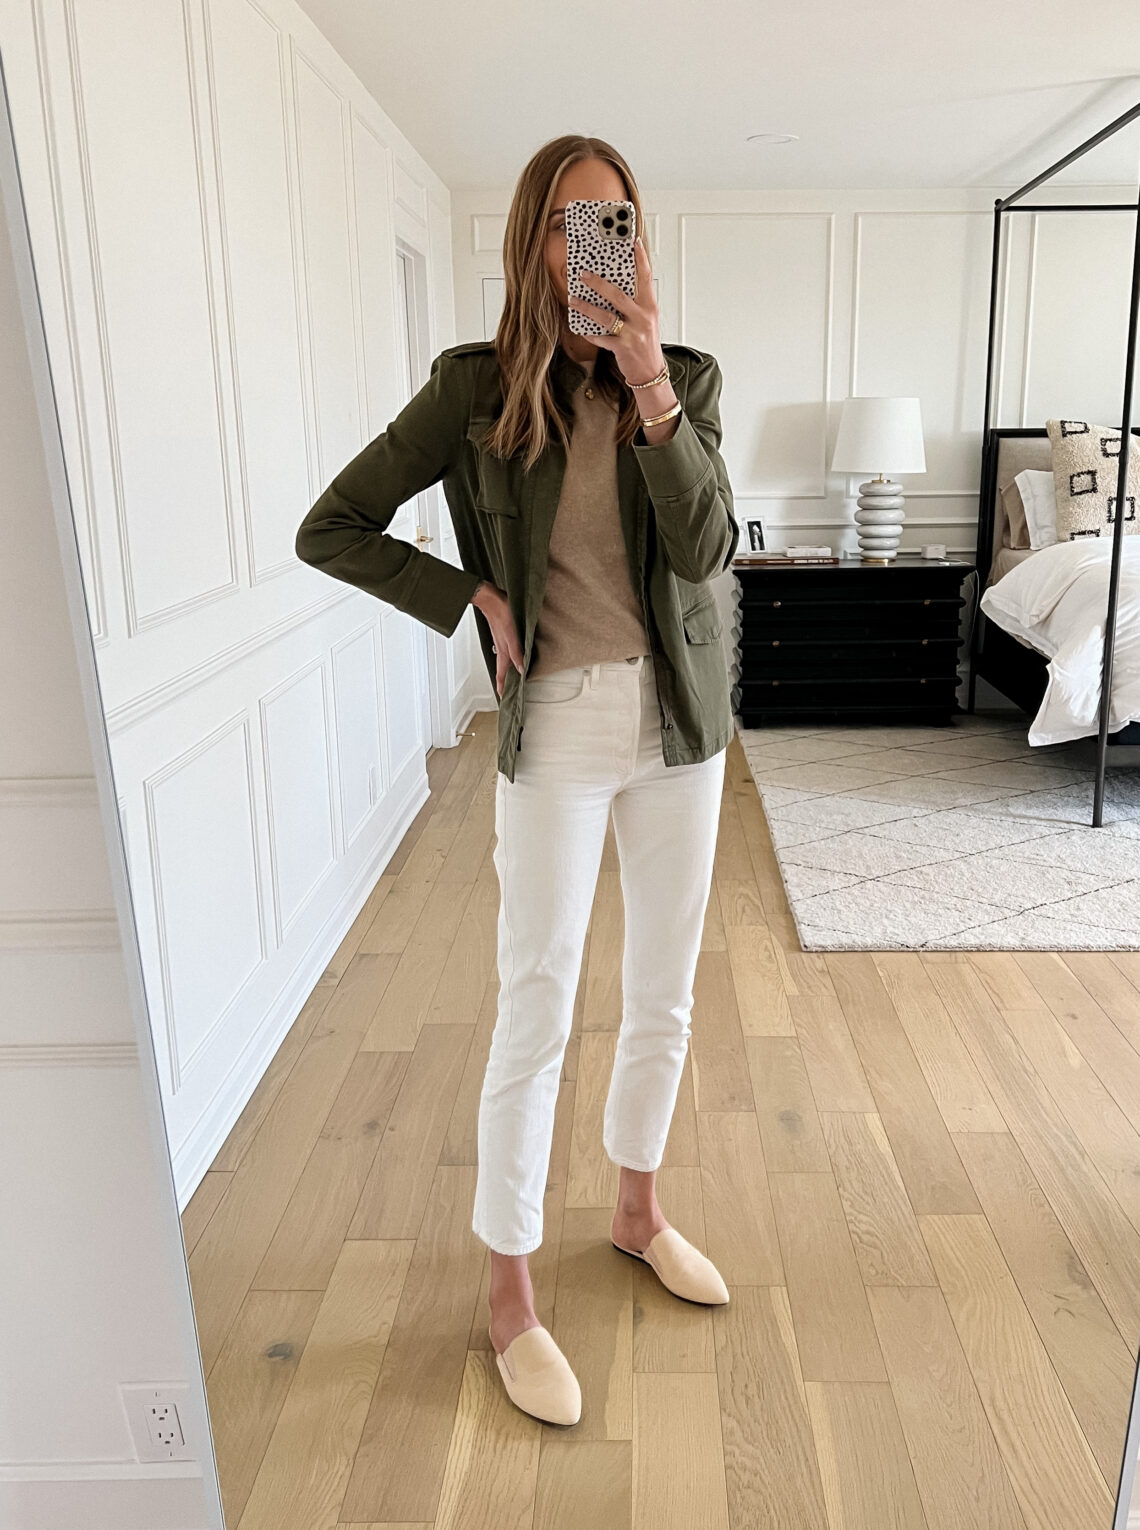 Fashion Jackson Wearing Spring Capsule Wardrobe Outfit, Green Utility Jacket, Tan Sweater, White Jeans, Beige Mules, Spring Outfit